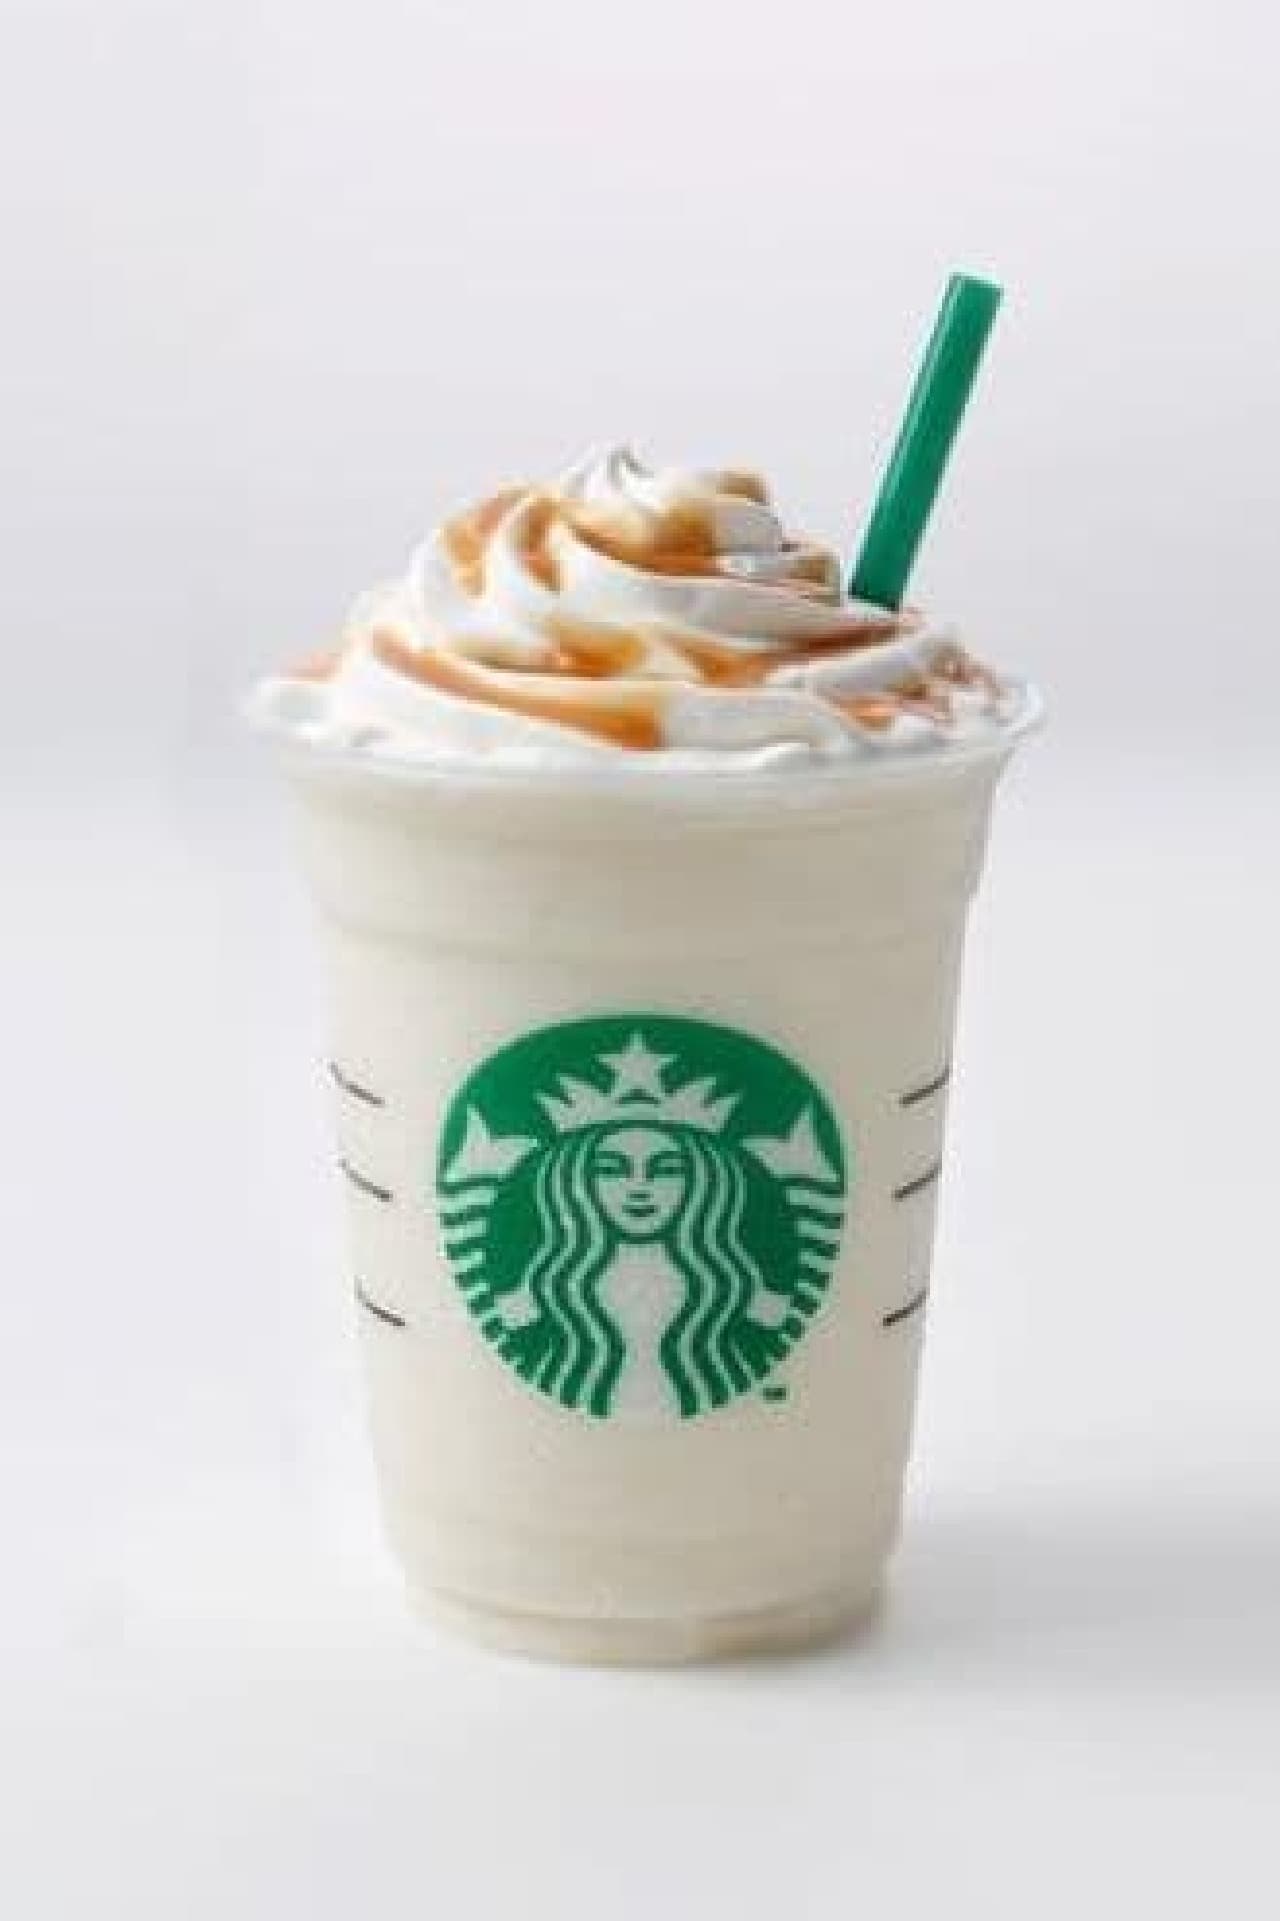 Limited frappe only for now! [Source: Starbucks Coffee Japan Facebook Page]